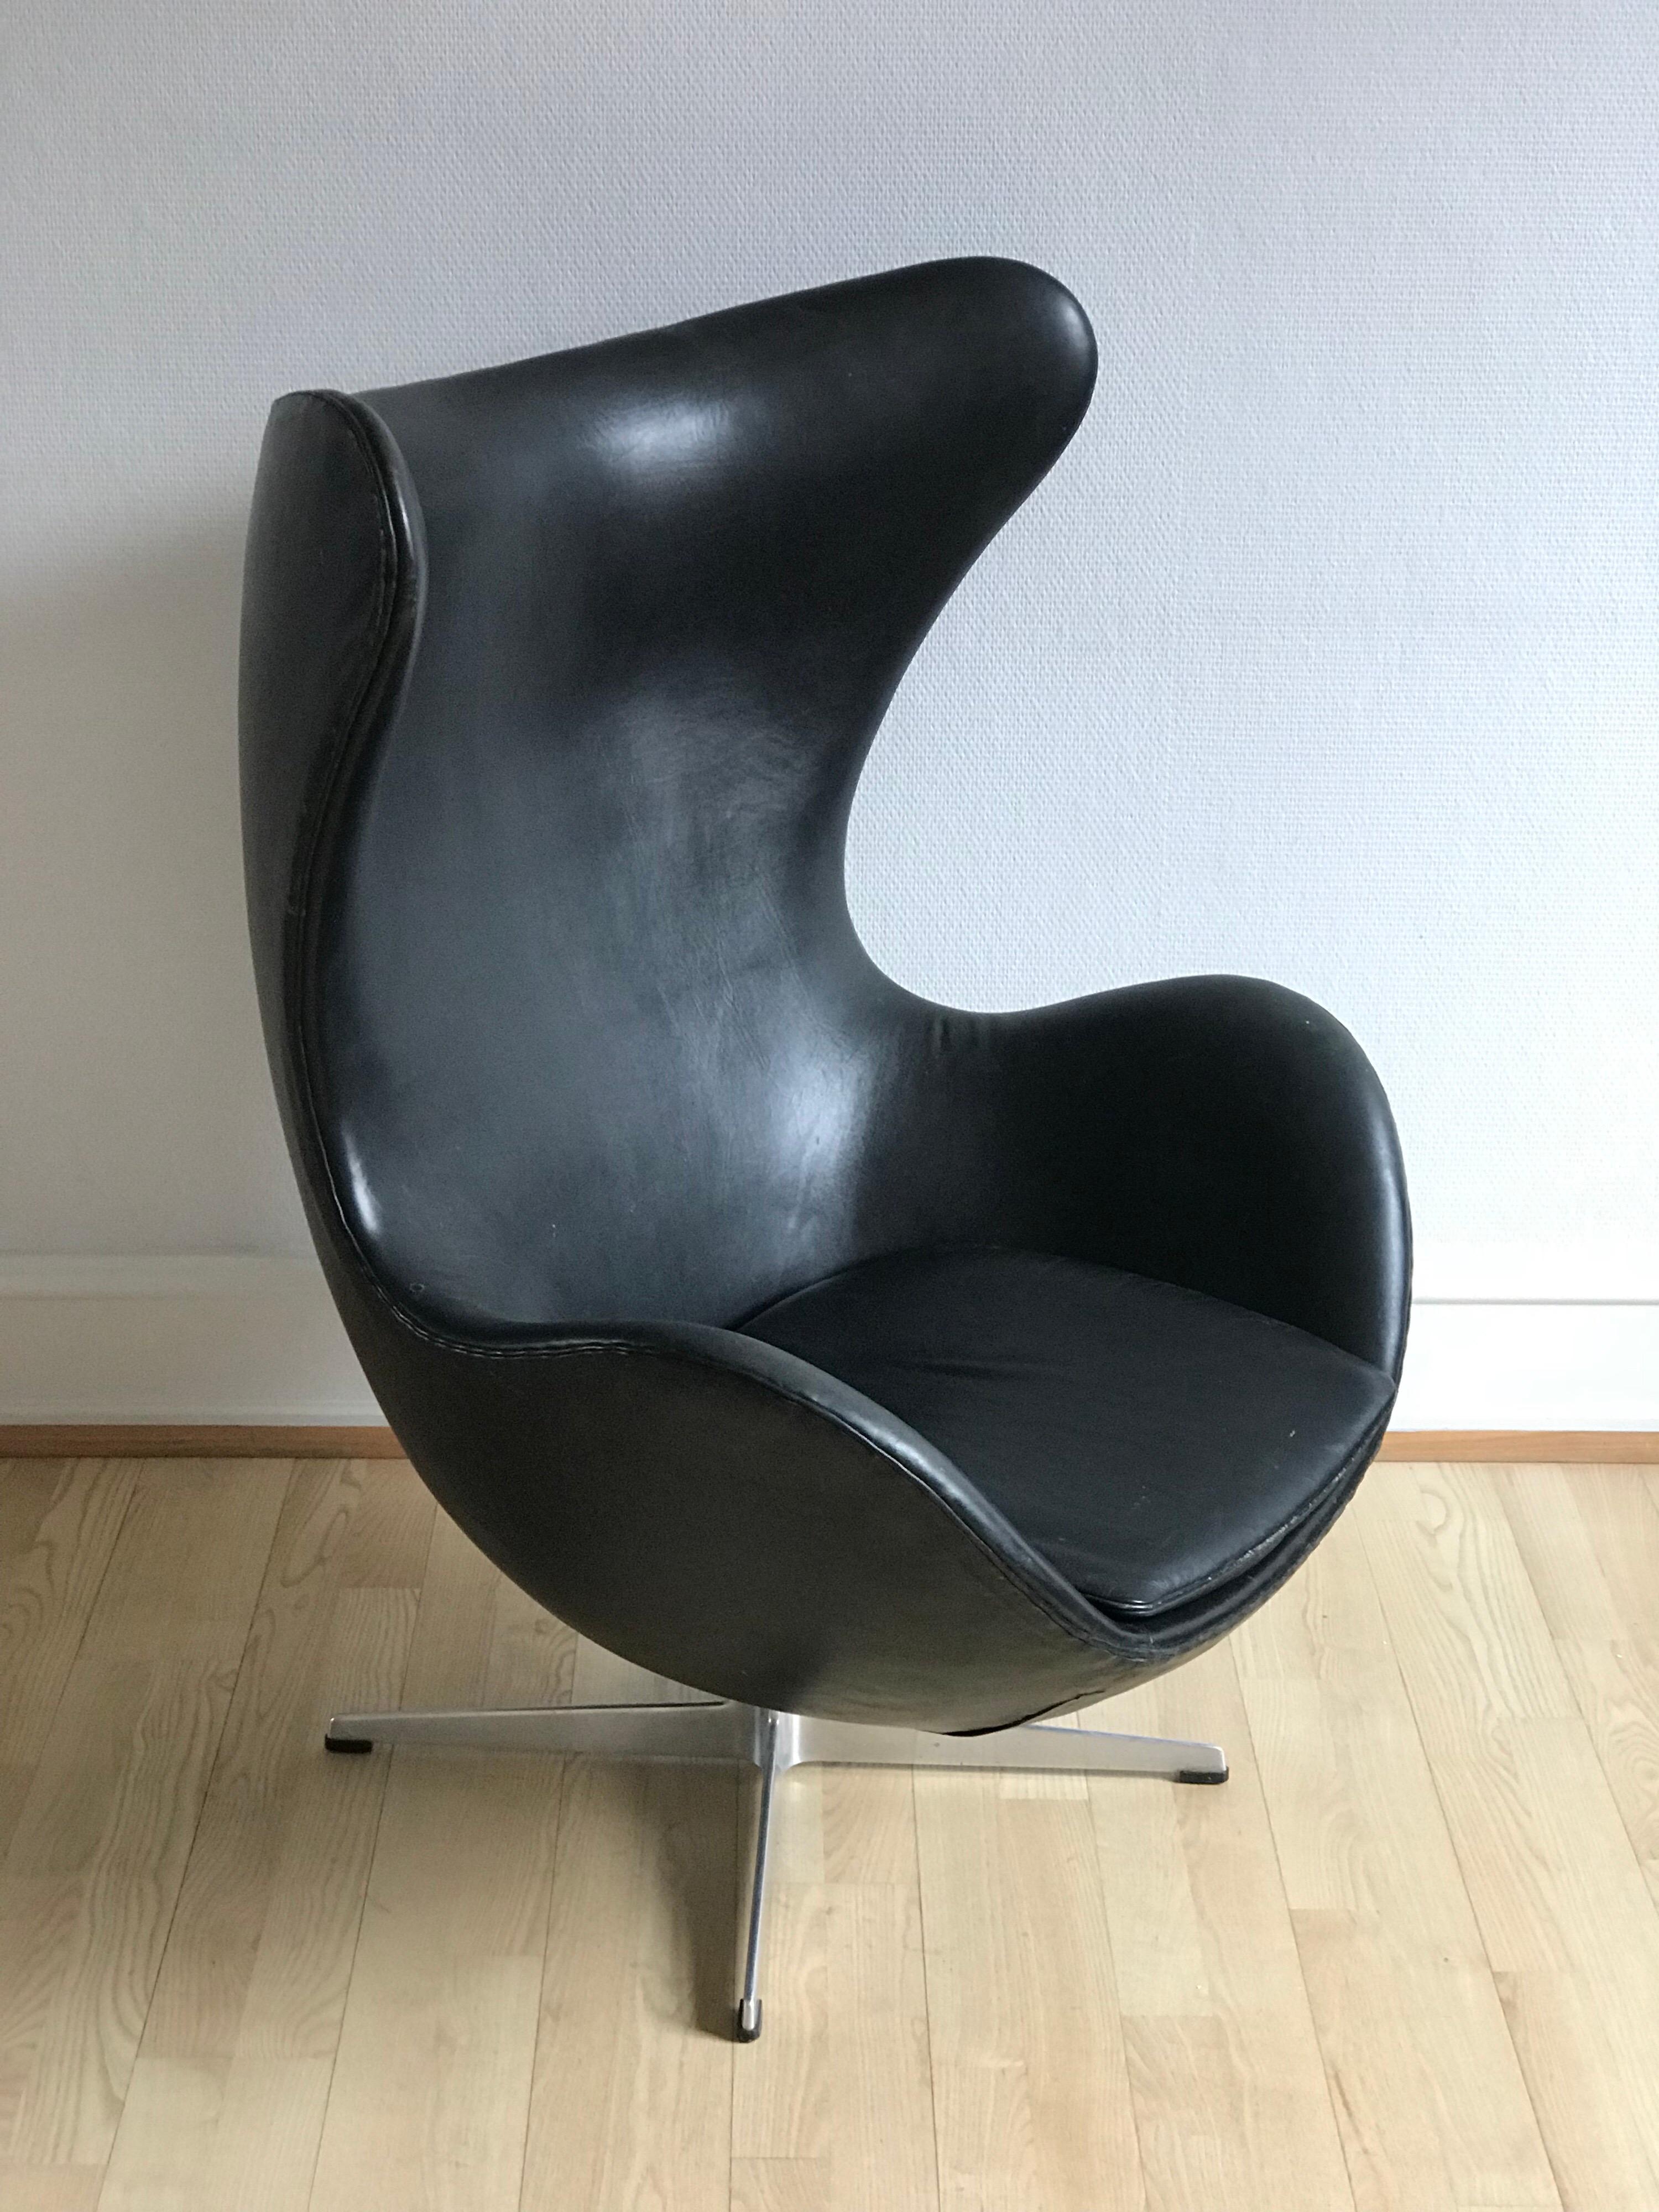 Iconic Vintage Arne Jacobsen 3316 Egg Chair in Black Leather from 1975 1